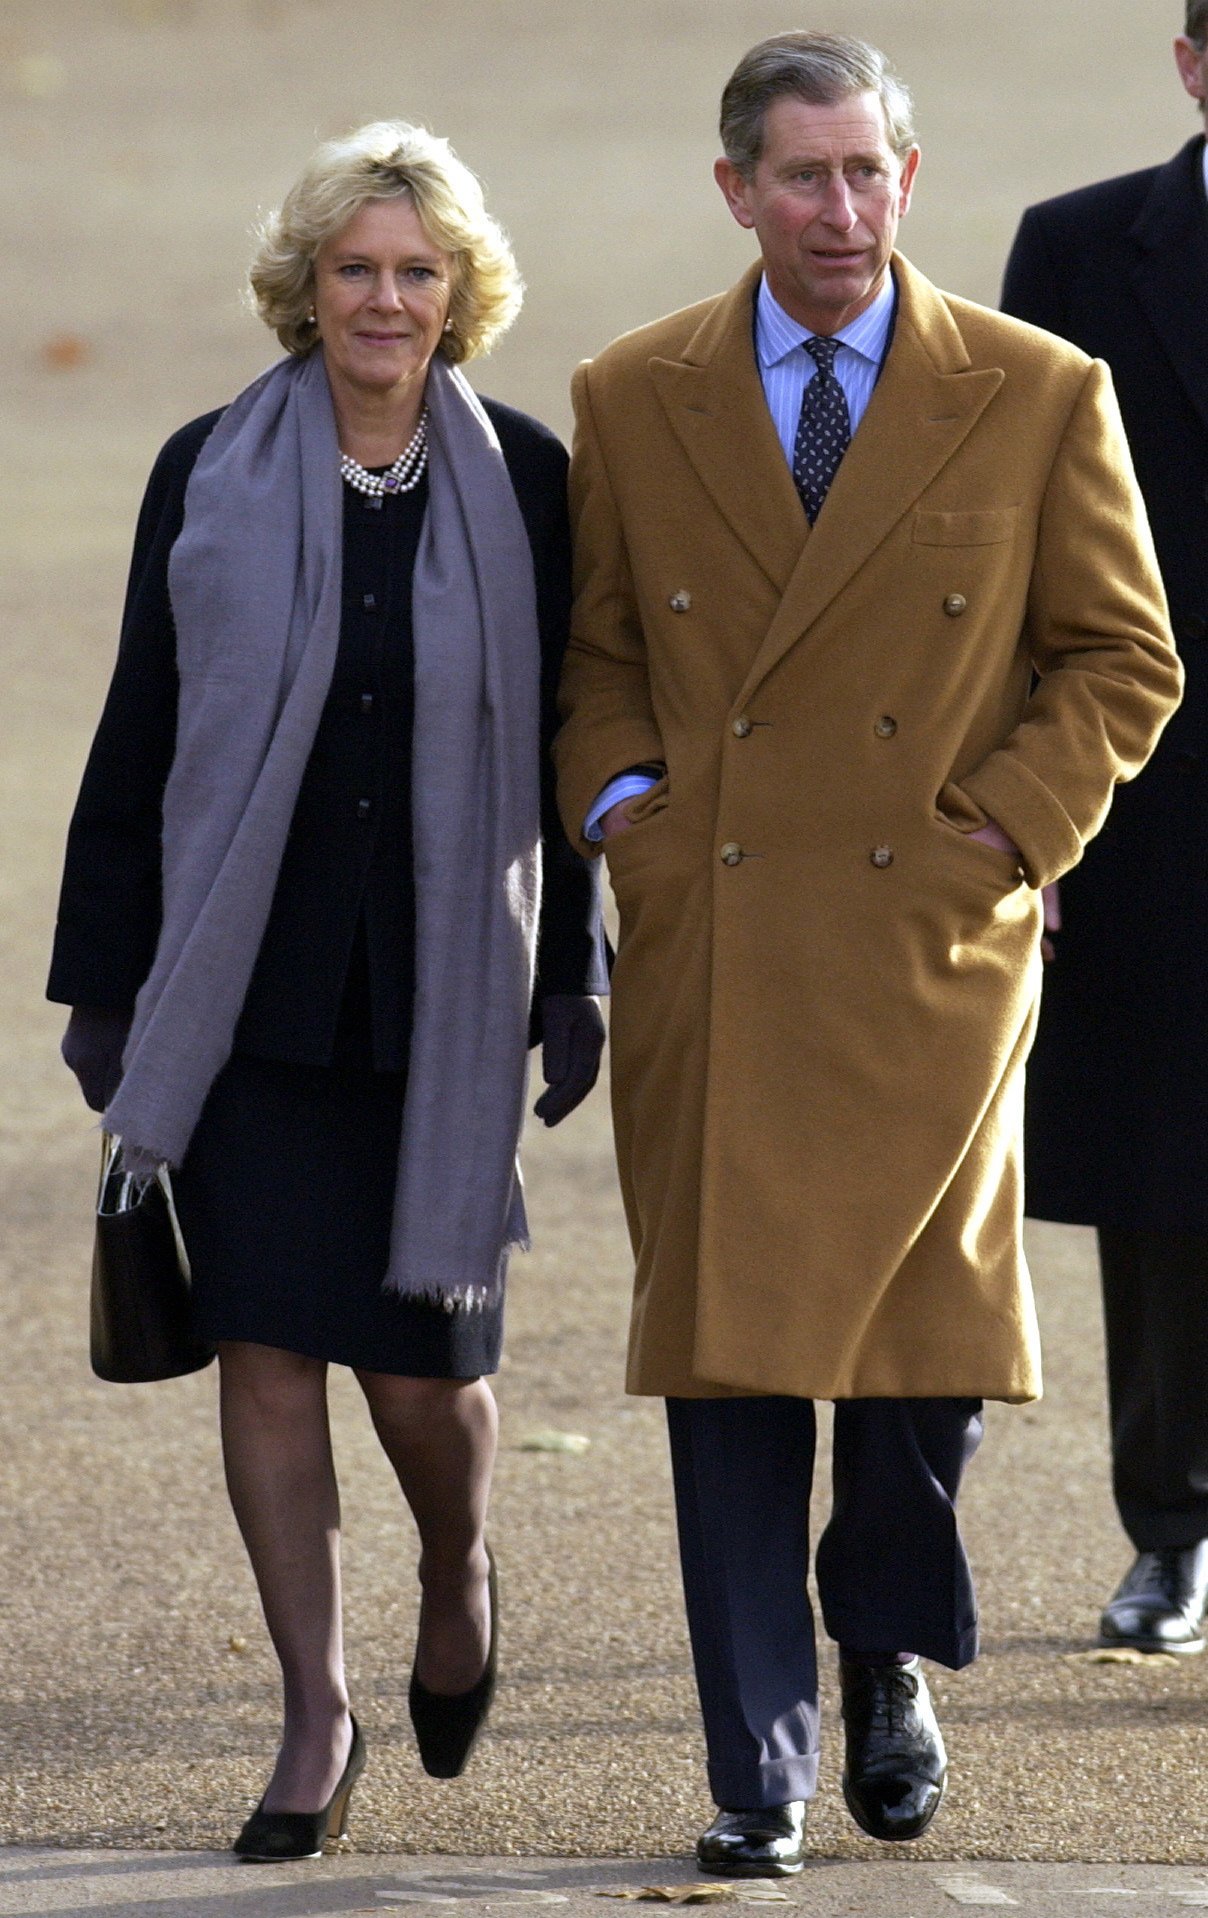 Prince Charles and Camilla in London on 19 December. | Source: Getty Images 